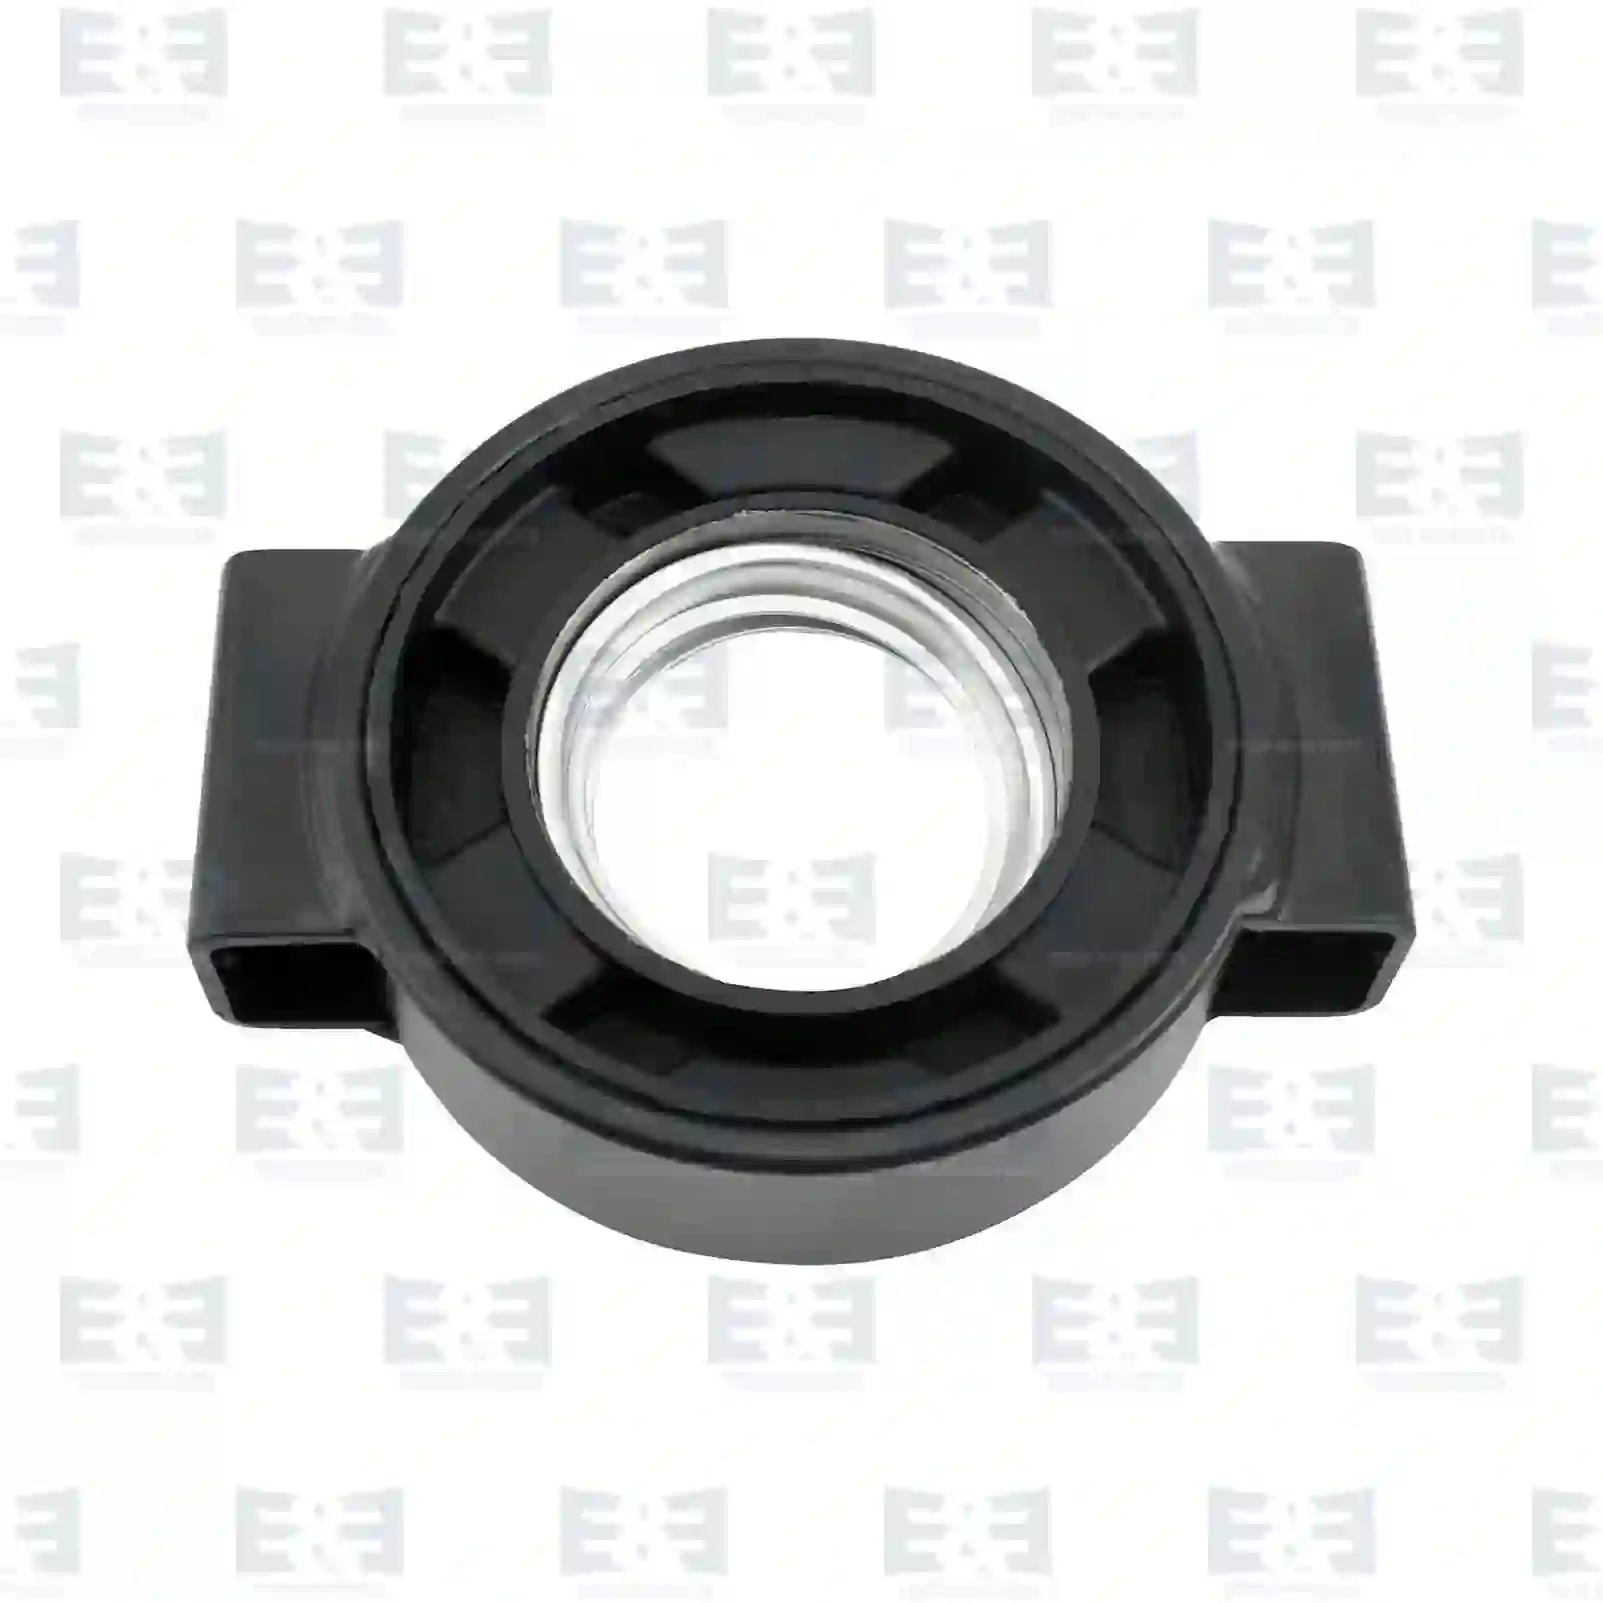 Support Bearing Center bearing, without ball bearing, EE No 2E2276962 ,  oem no:3954100022, 6204100010, 6554100122 E&E Truck Spare Parts | Truck Spare Parts, Auotomotive Spare Parts